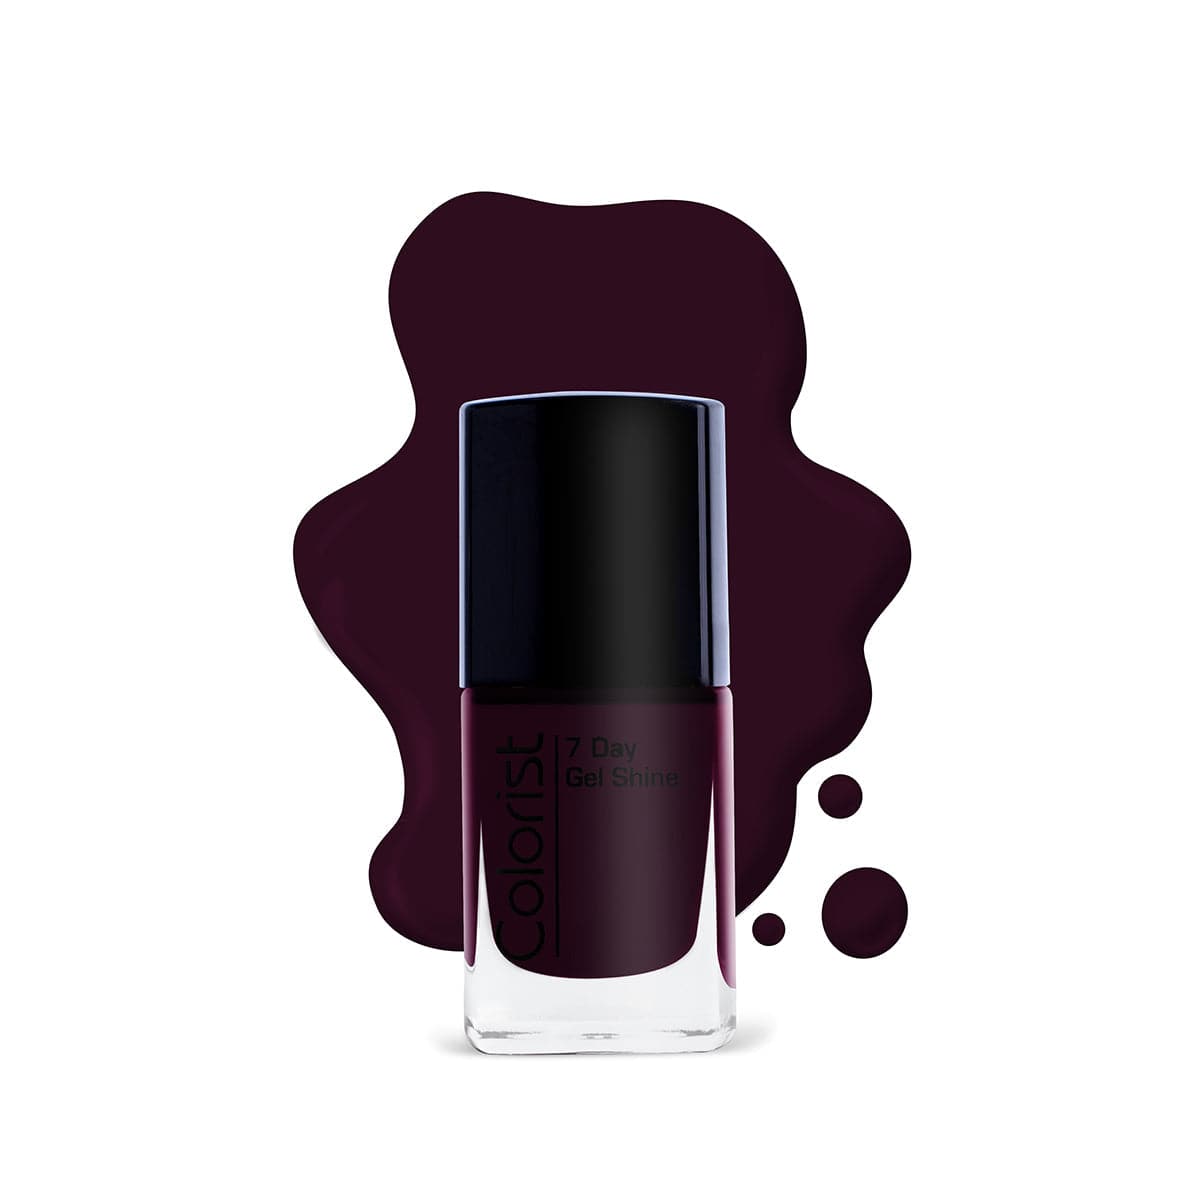 ST London Colorist Nail Paint - St049 Voodoo - Premium Health & Beauty from St London - Just Rs 330.00! Shop now at Cozmetica